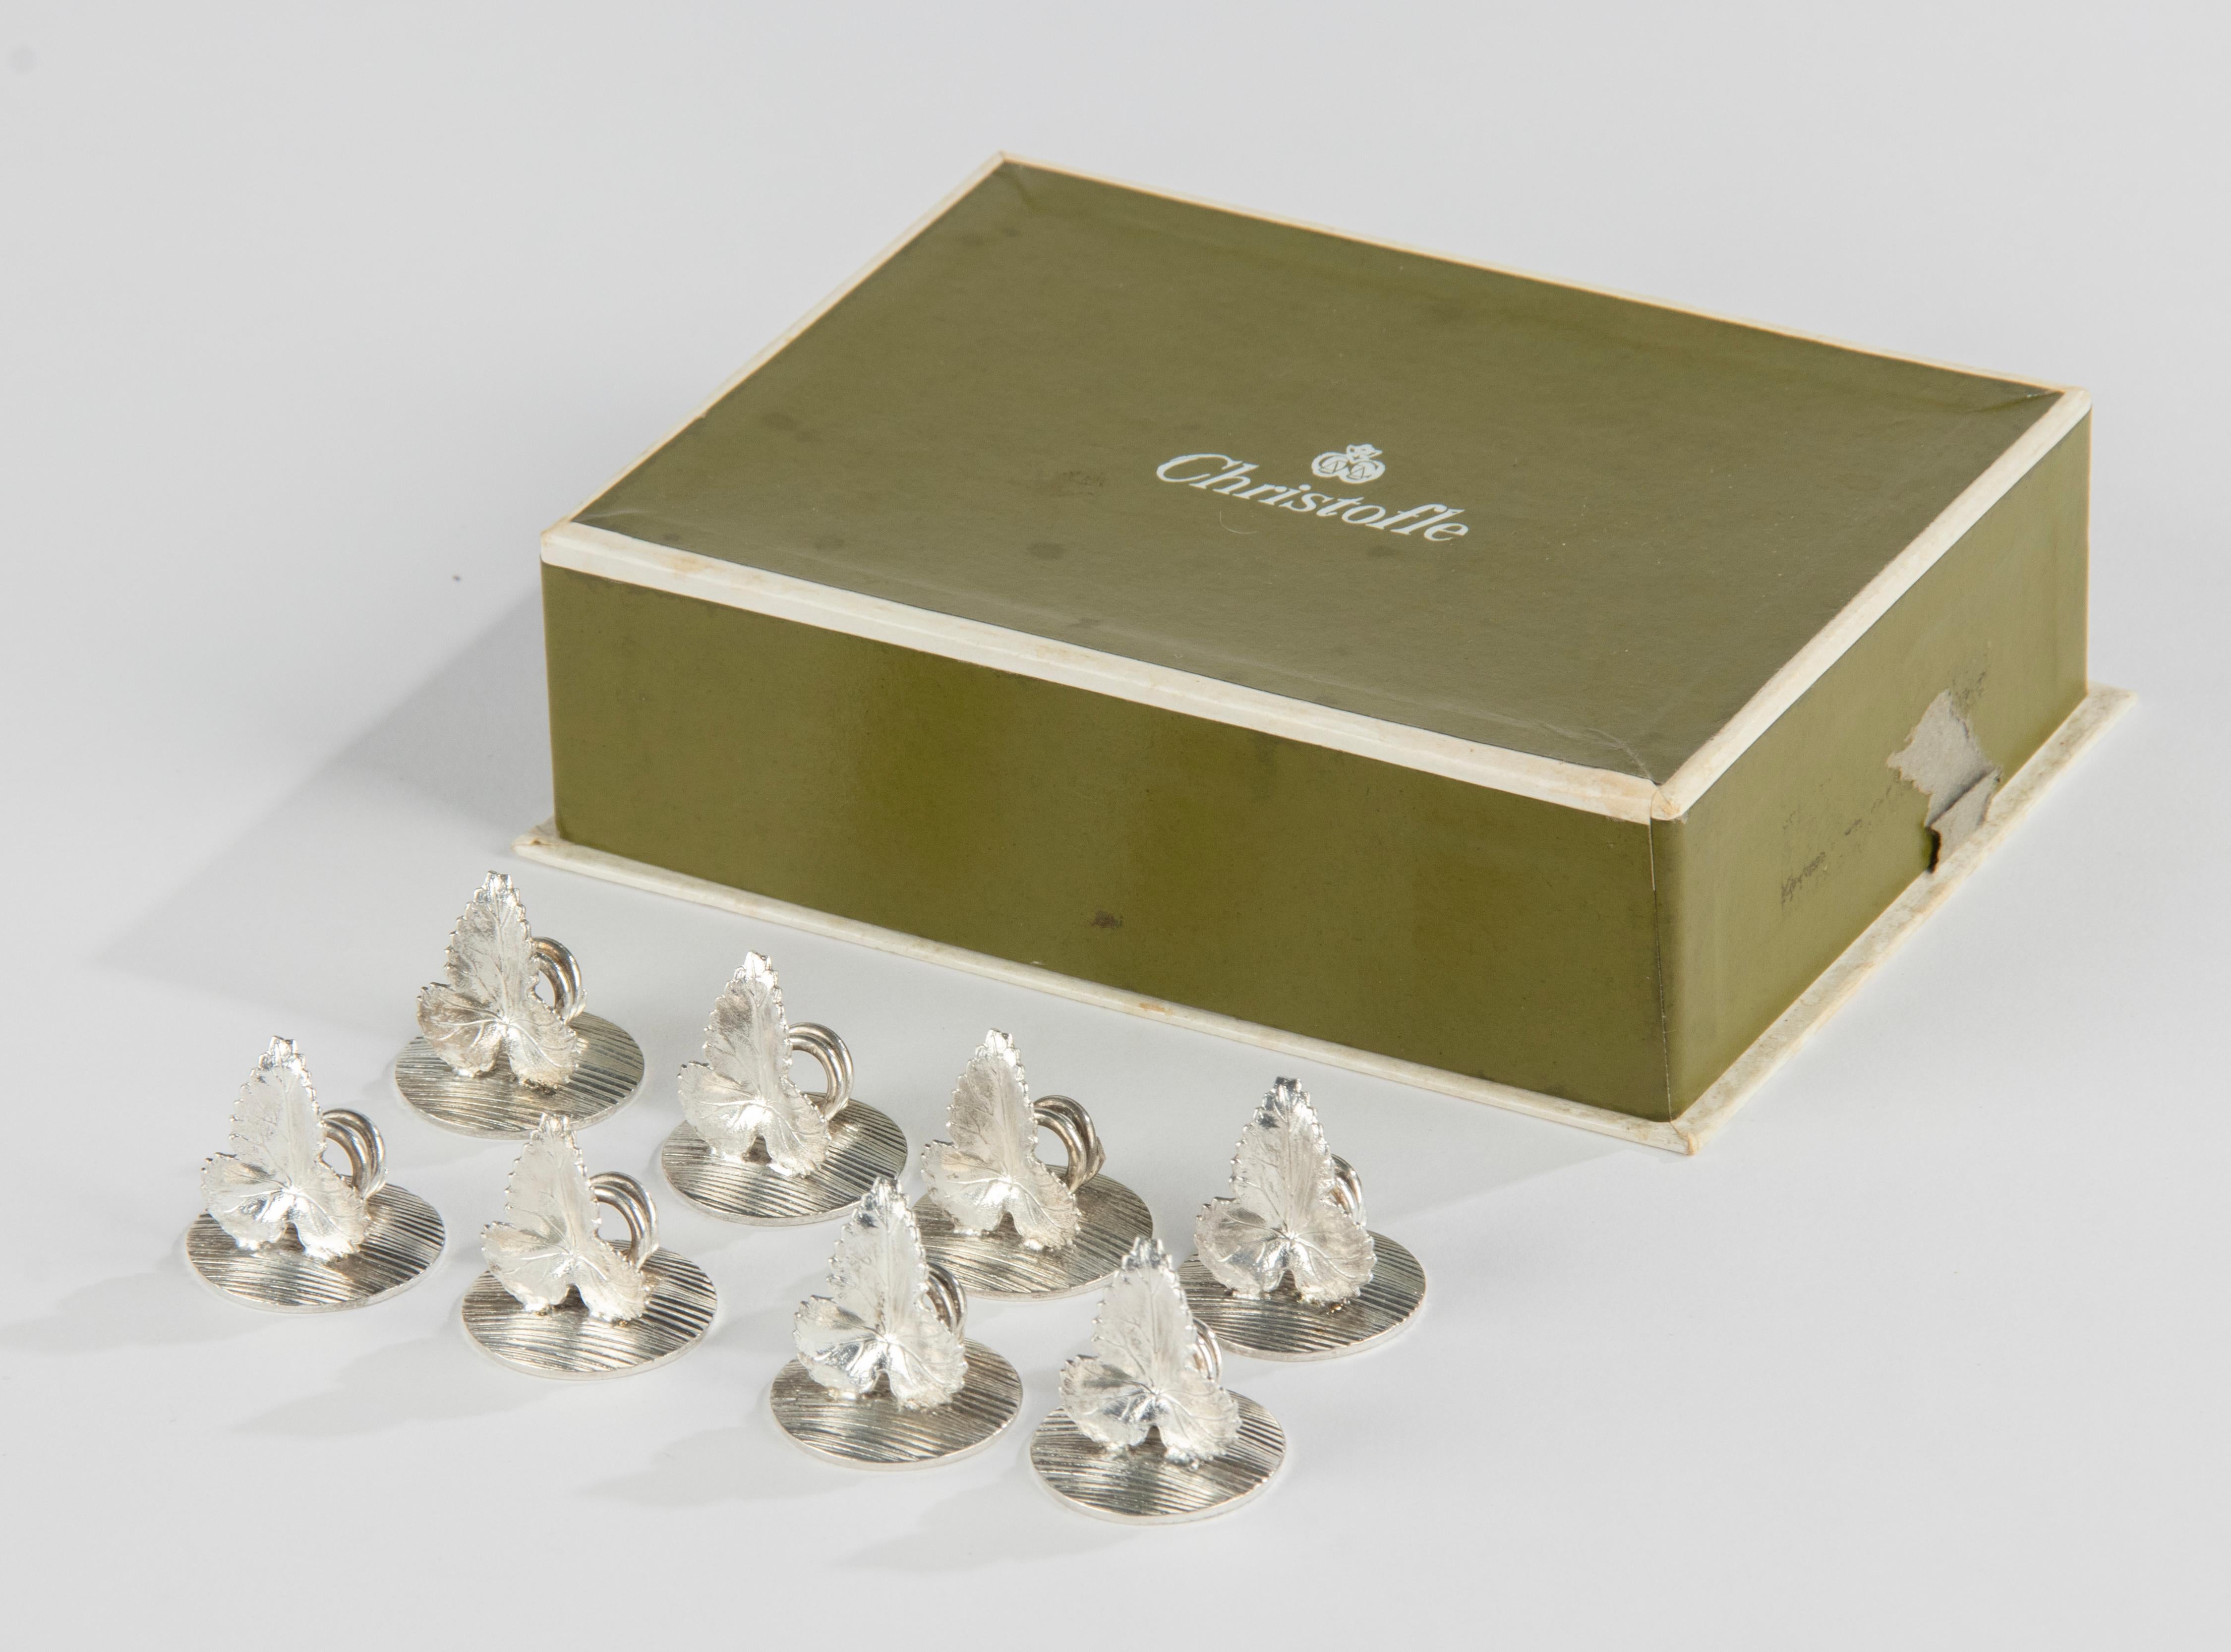 French 8-Piece Set Name Card Holders with Vine Leaf made by Christofle France